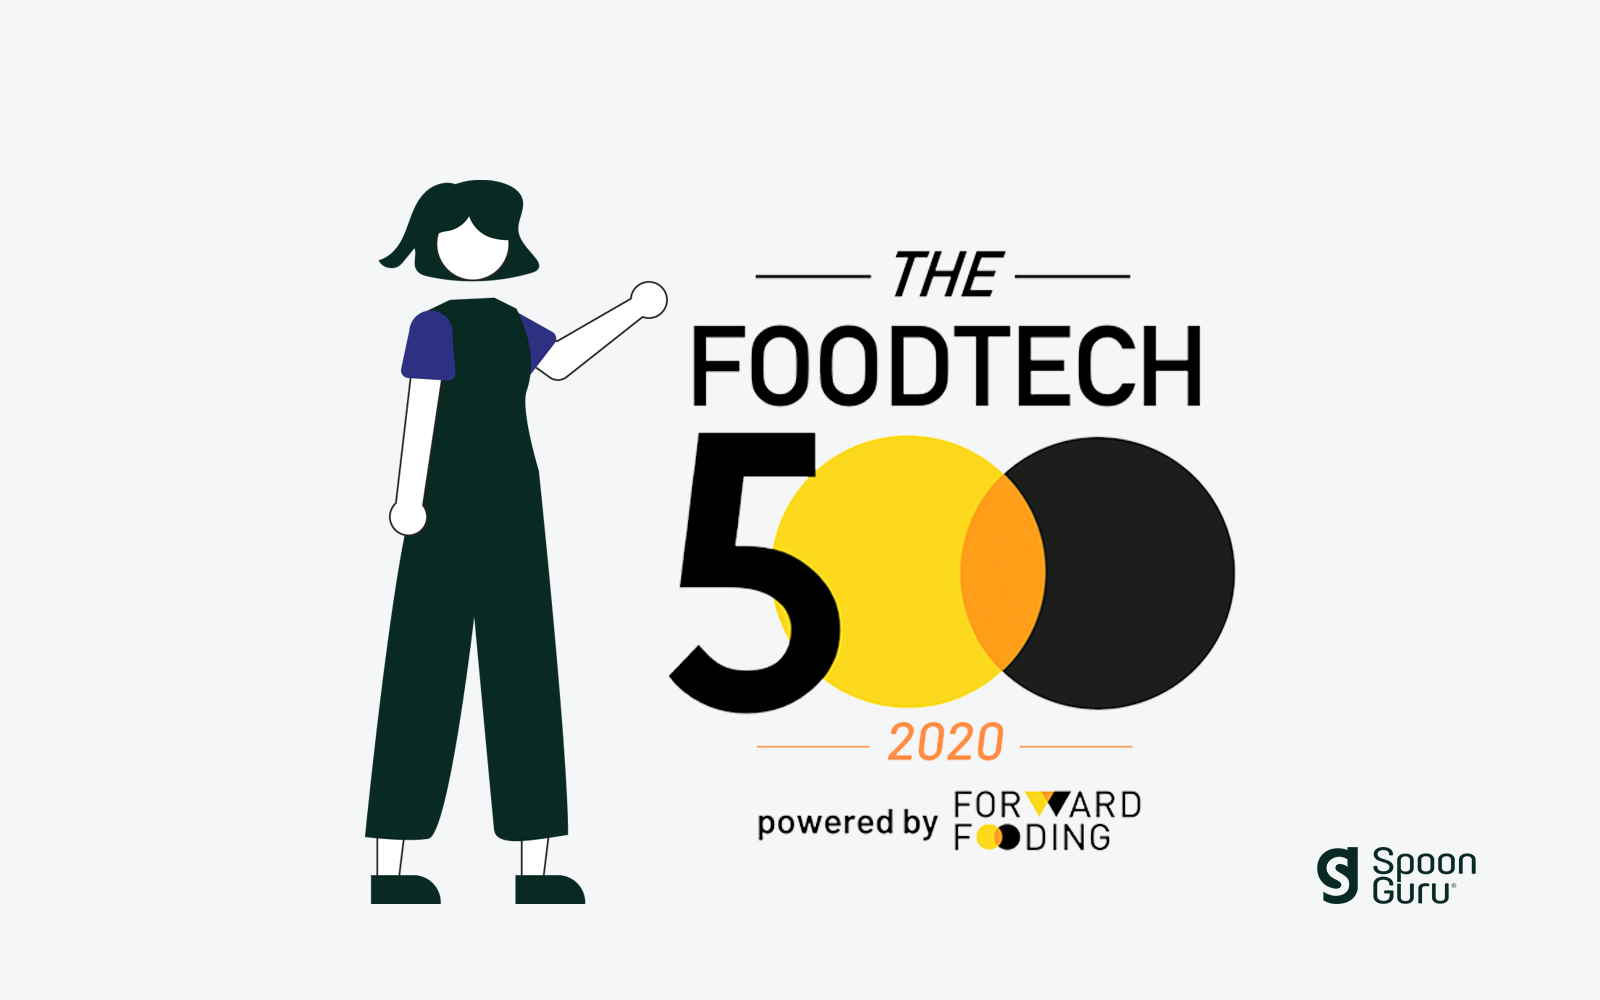 Spoon Guru is officially a winner in this year’s FoodTech 500 by Forward Fooding